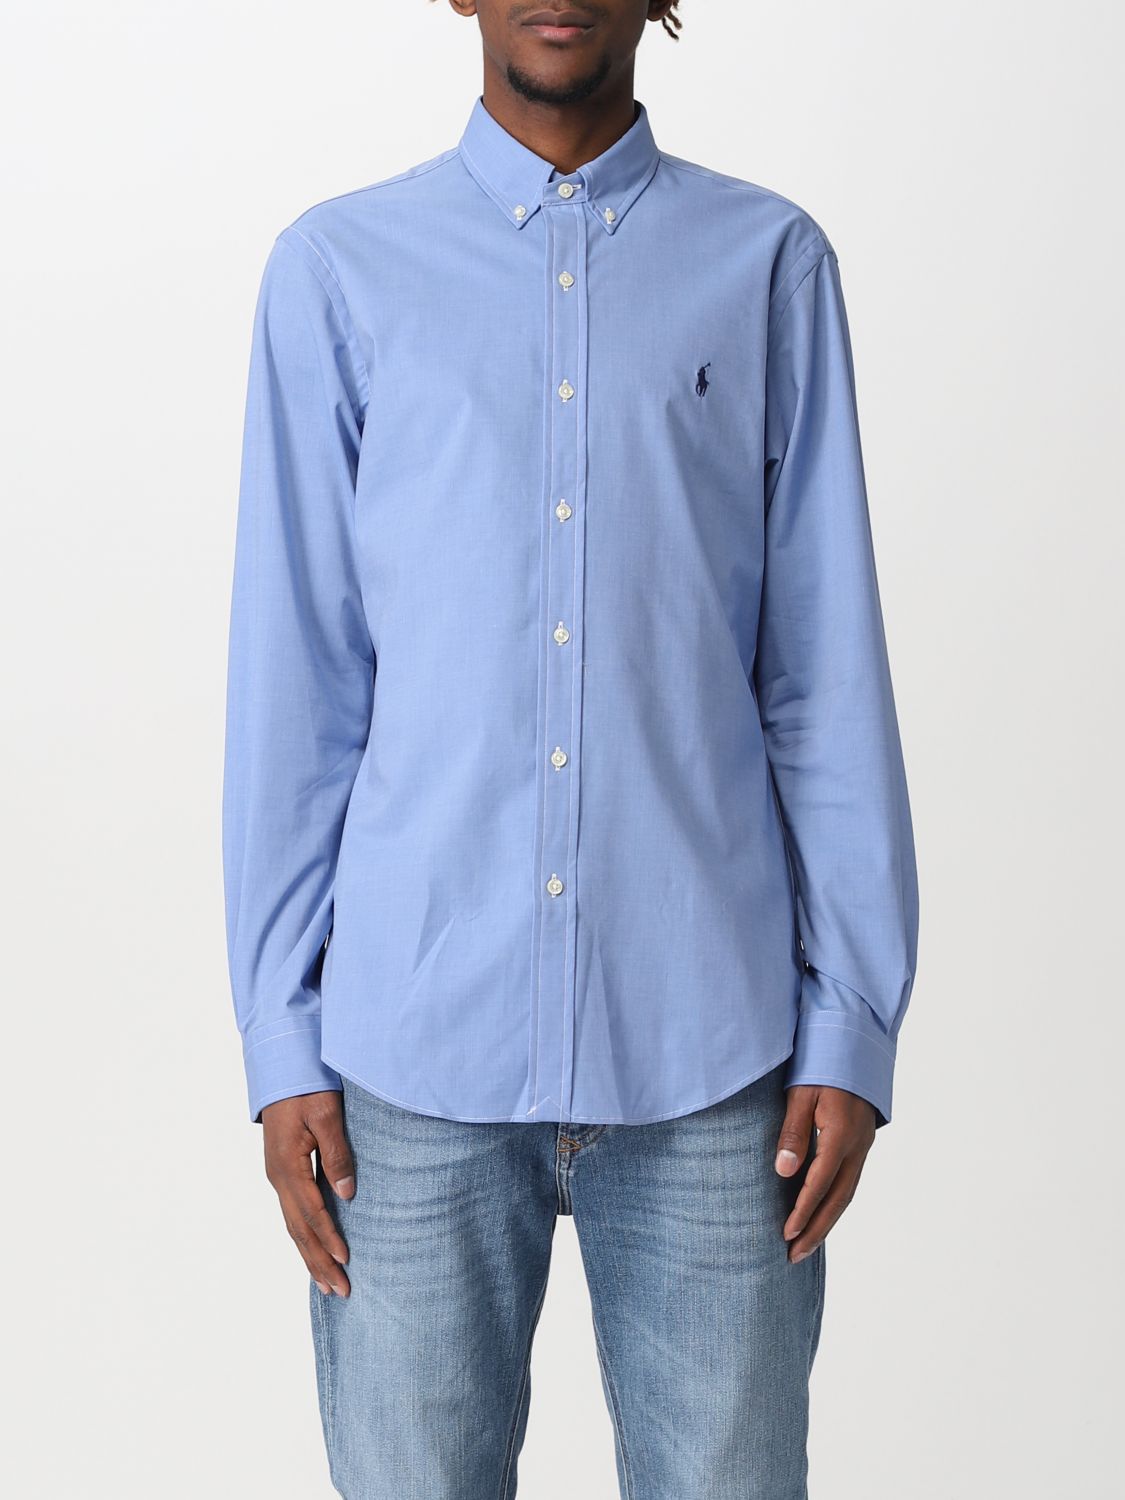 Polo Ralph Lauren Outlet: basic shirt with embroidered logo - Blue 1 | Polo  Ralph Lauren shirt 710832480 online on 